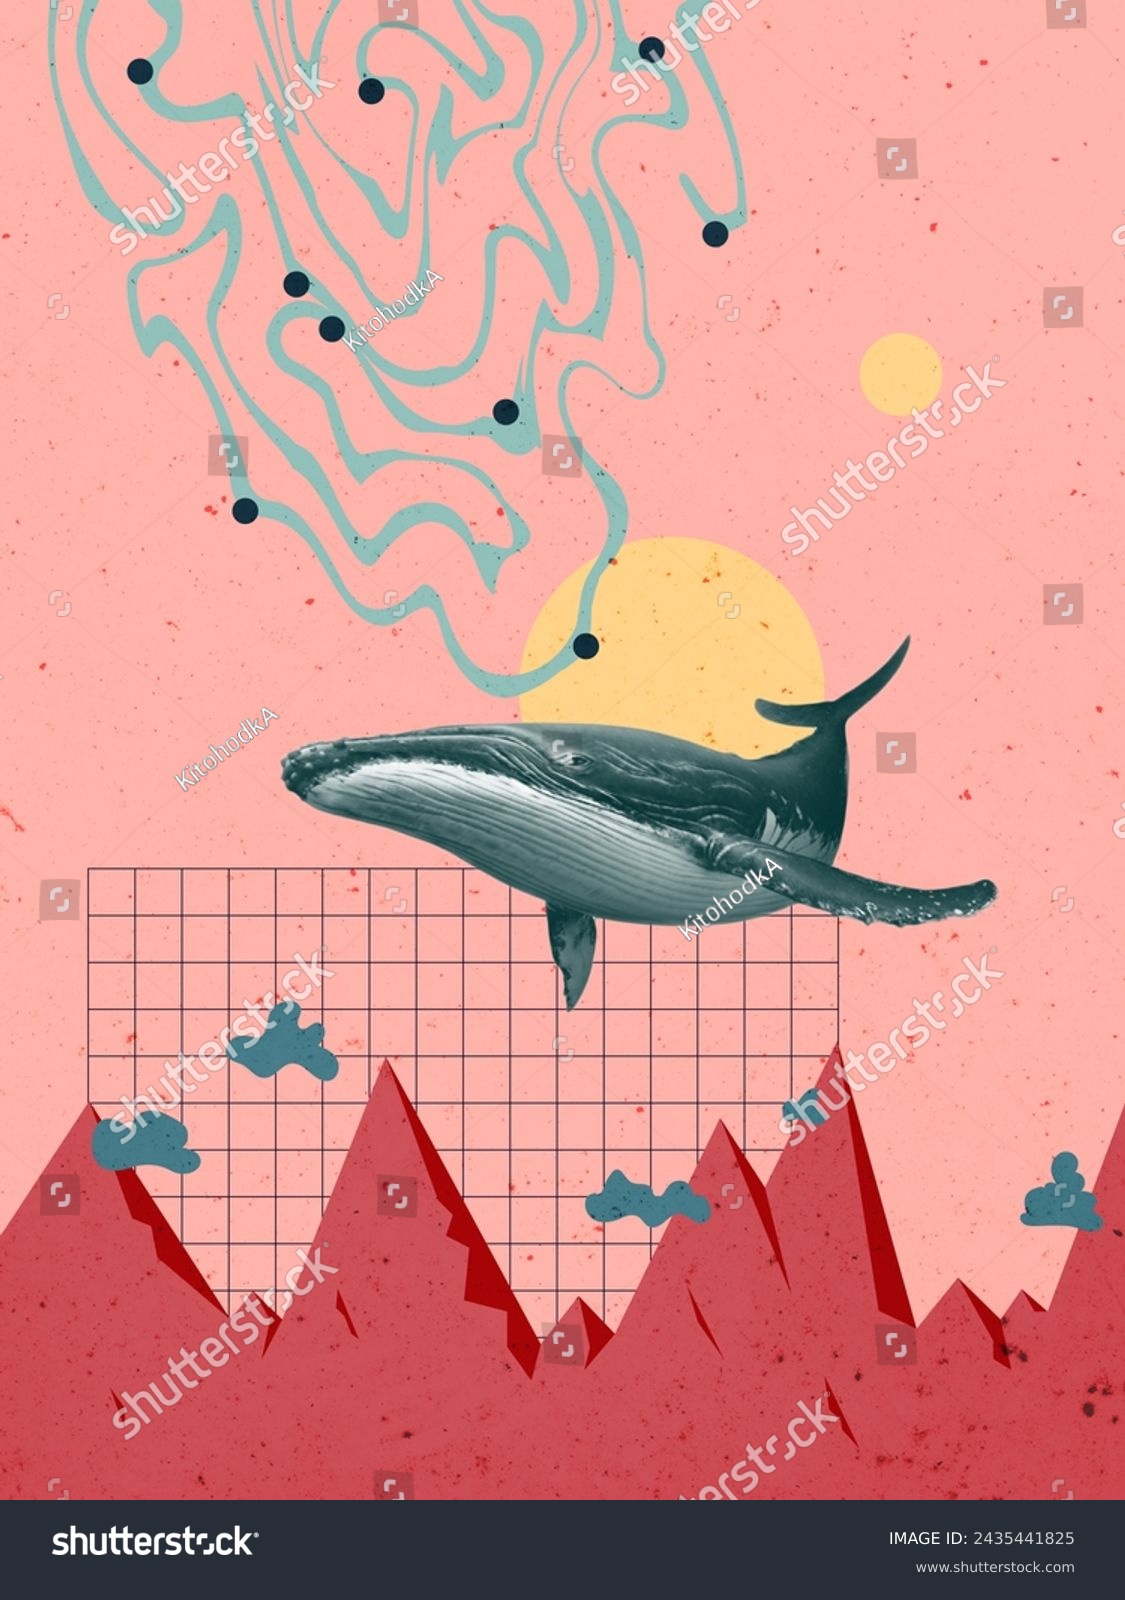 Animal Surreal Art Collage. Vector Illustration. Landscape Artwork. Poster Print. Pet Wild Life. Surrealism Flying Concept Beautiful. Asbtract Weaves Red Green Color Vintage Retro Geometric Line Grid #2435441825